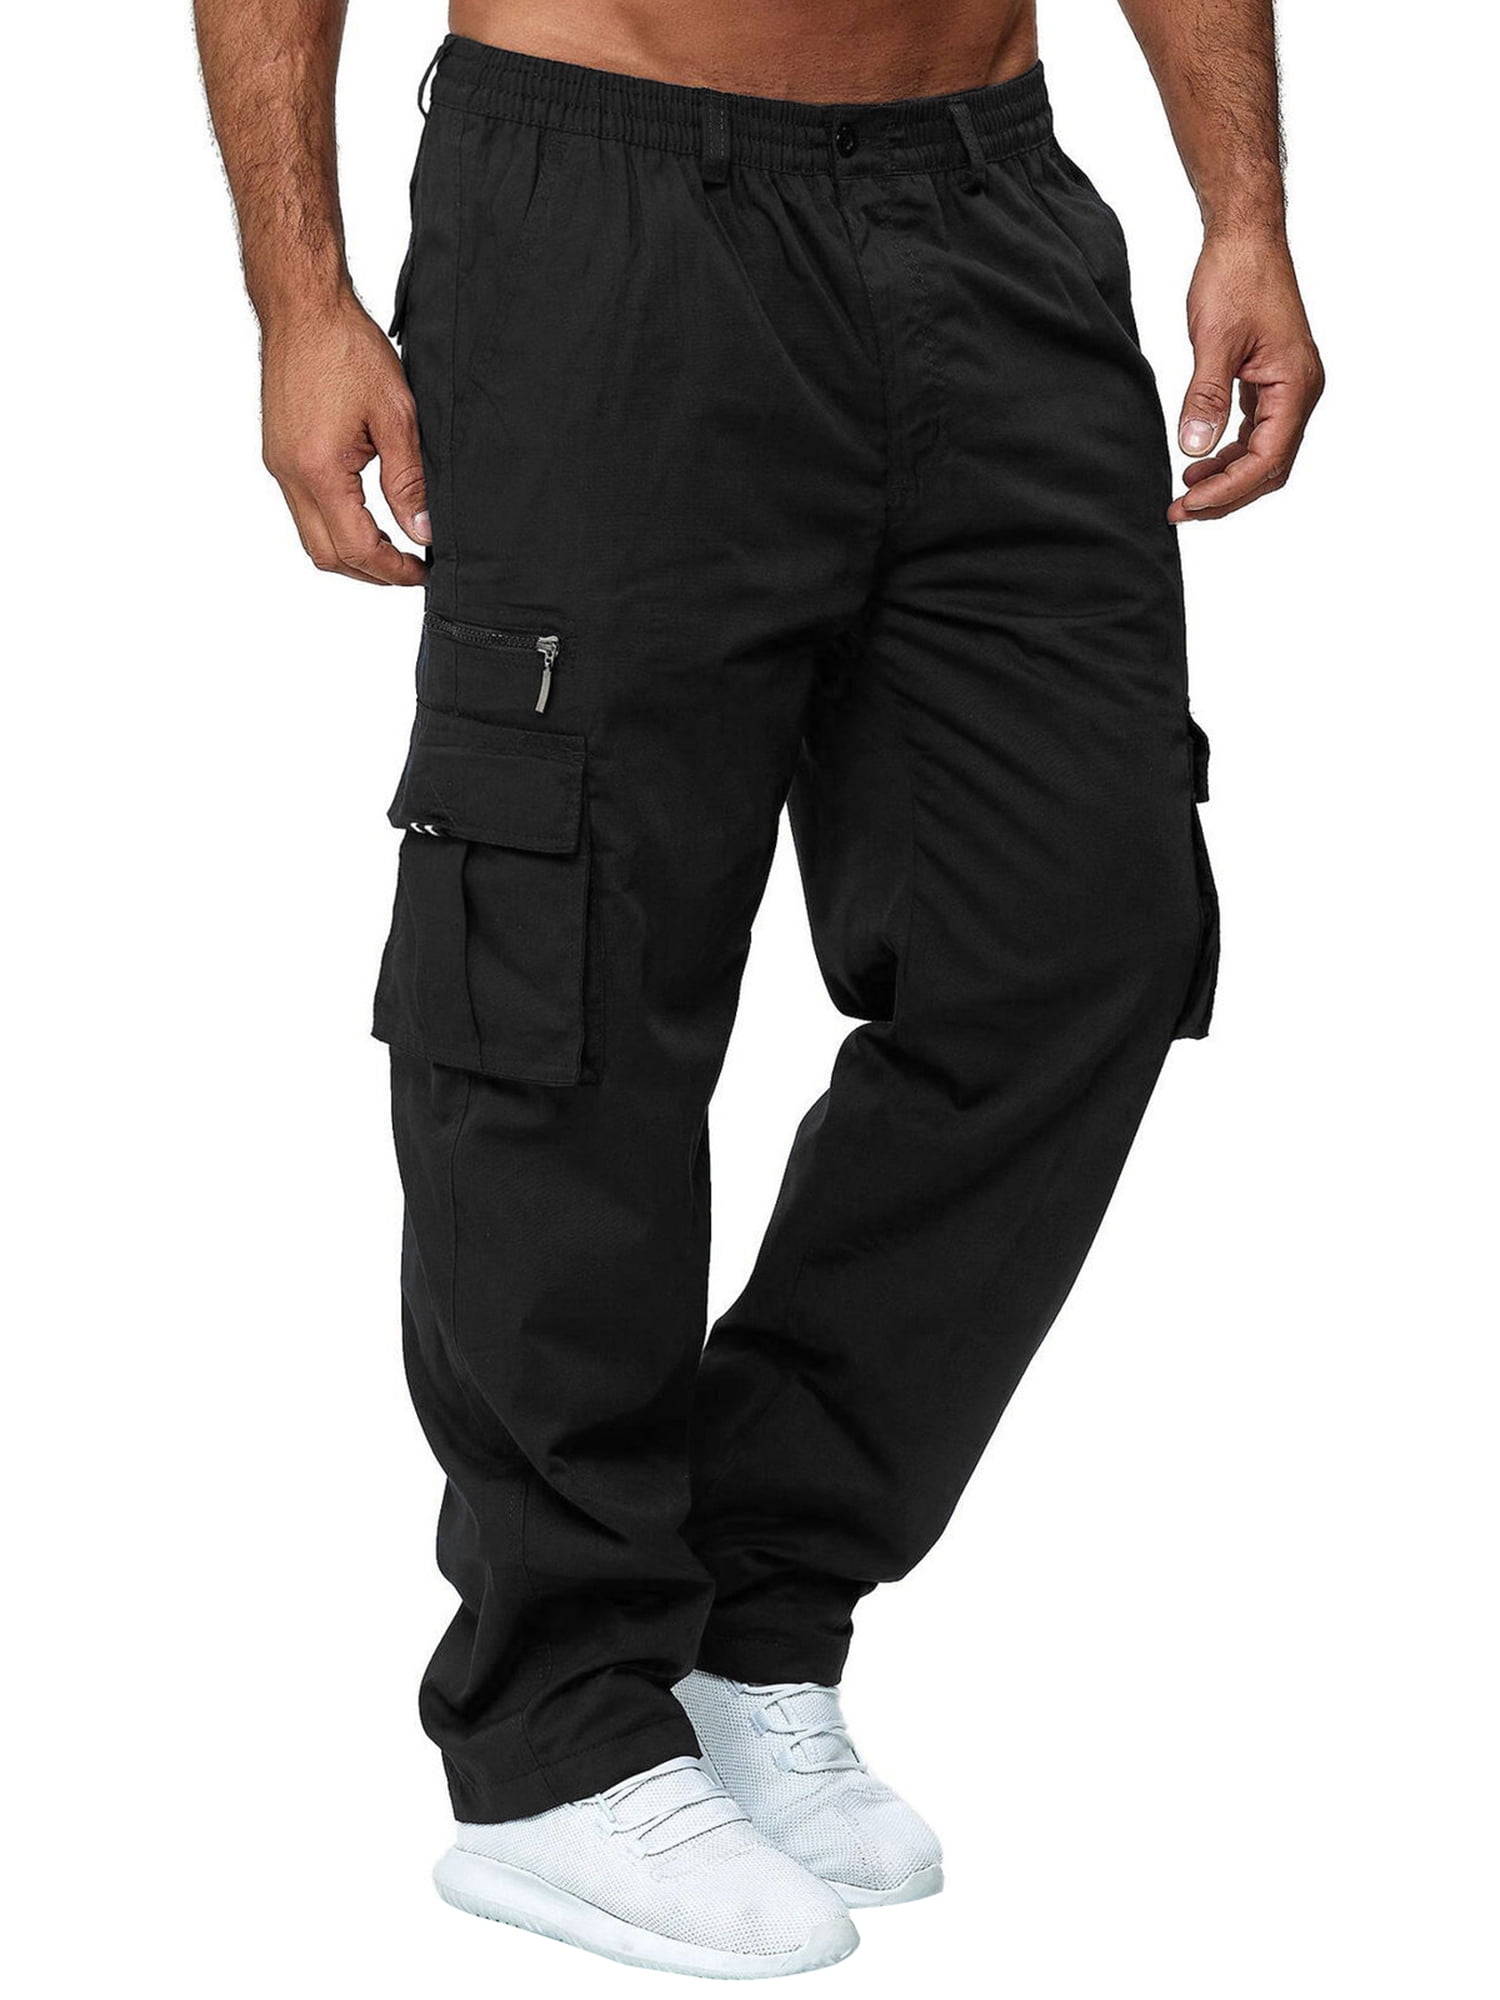 New BDU 2.0 Work Pants with Updated Features | Propper.com